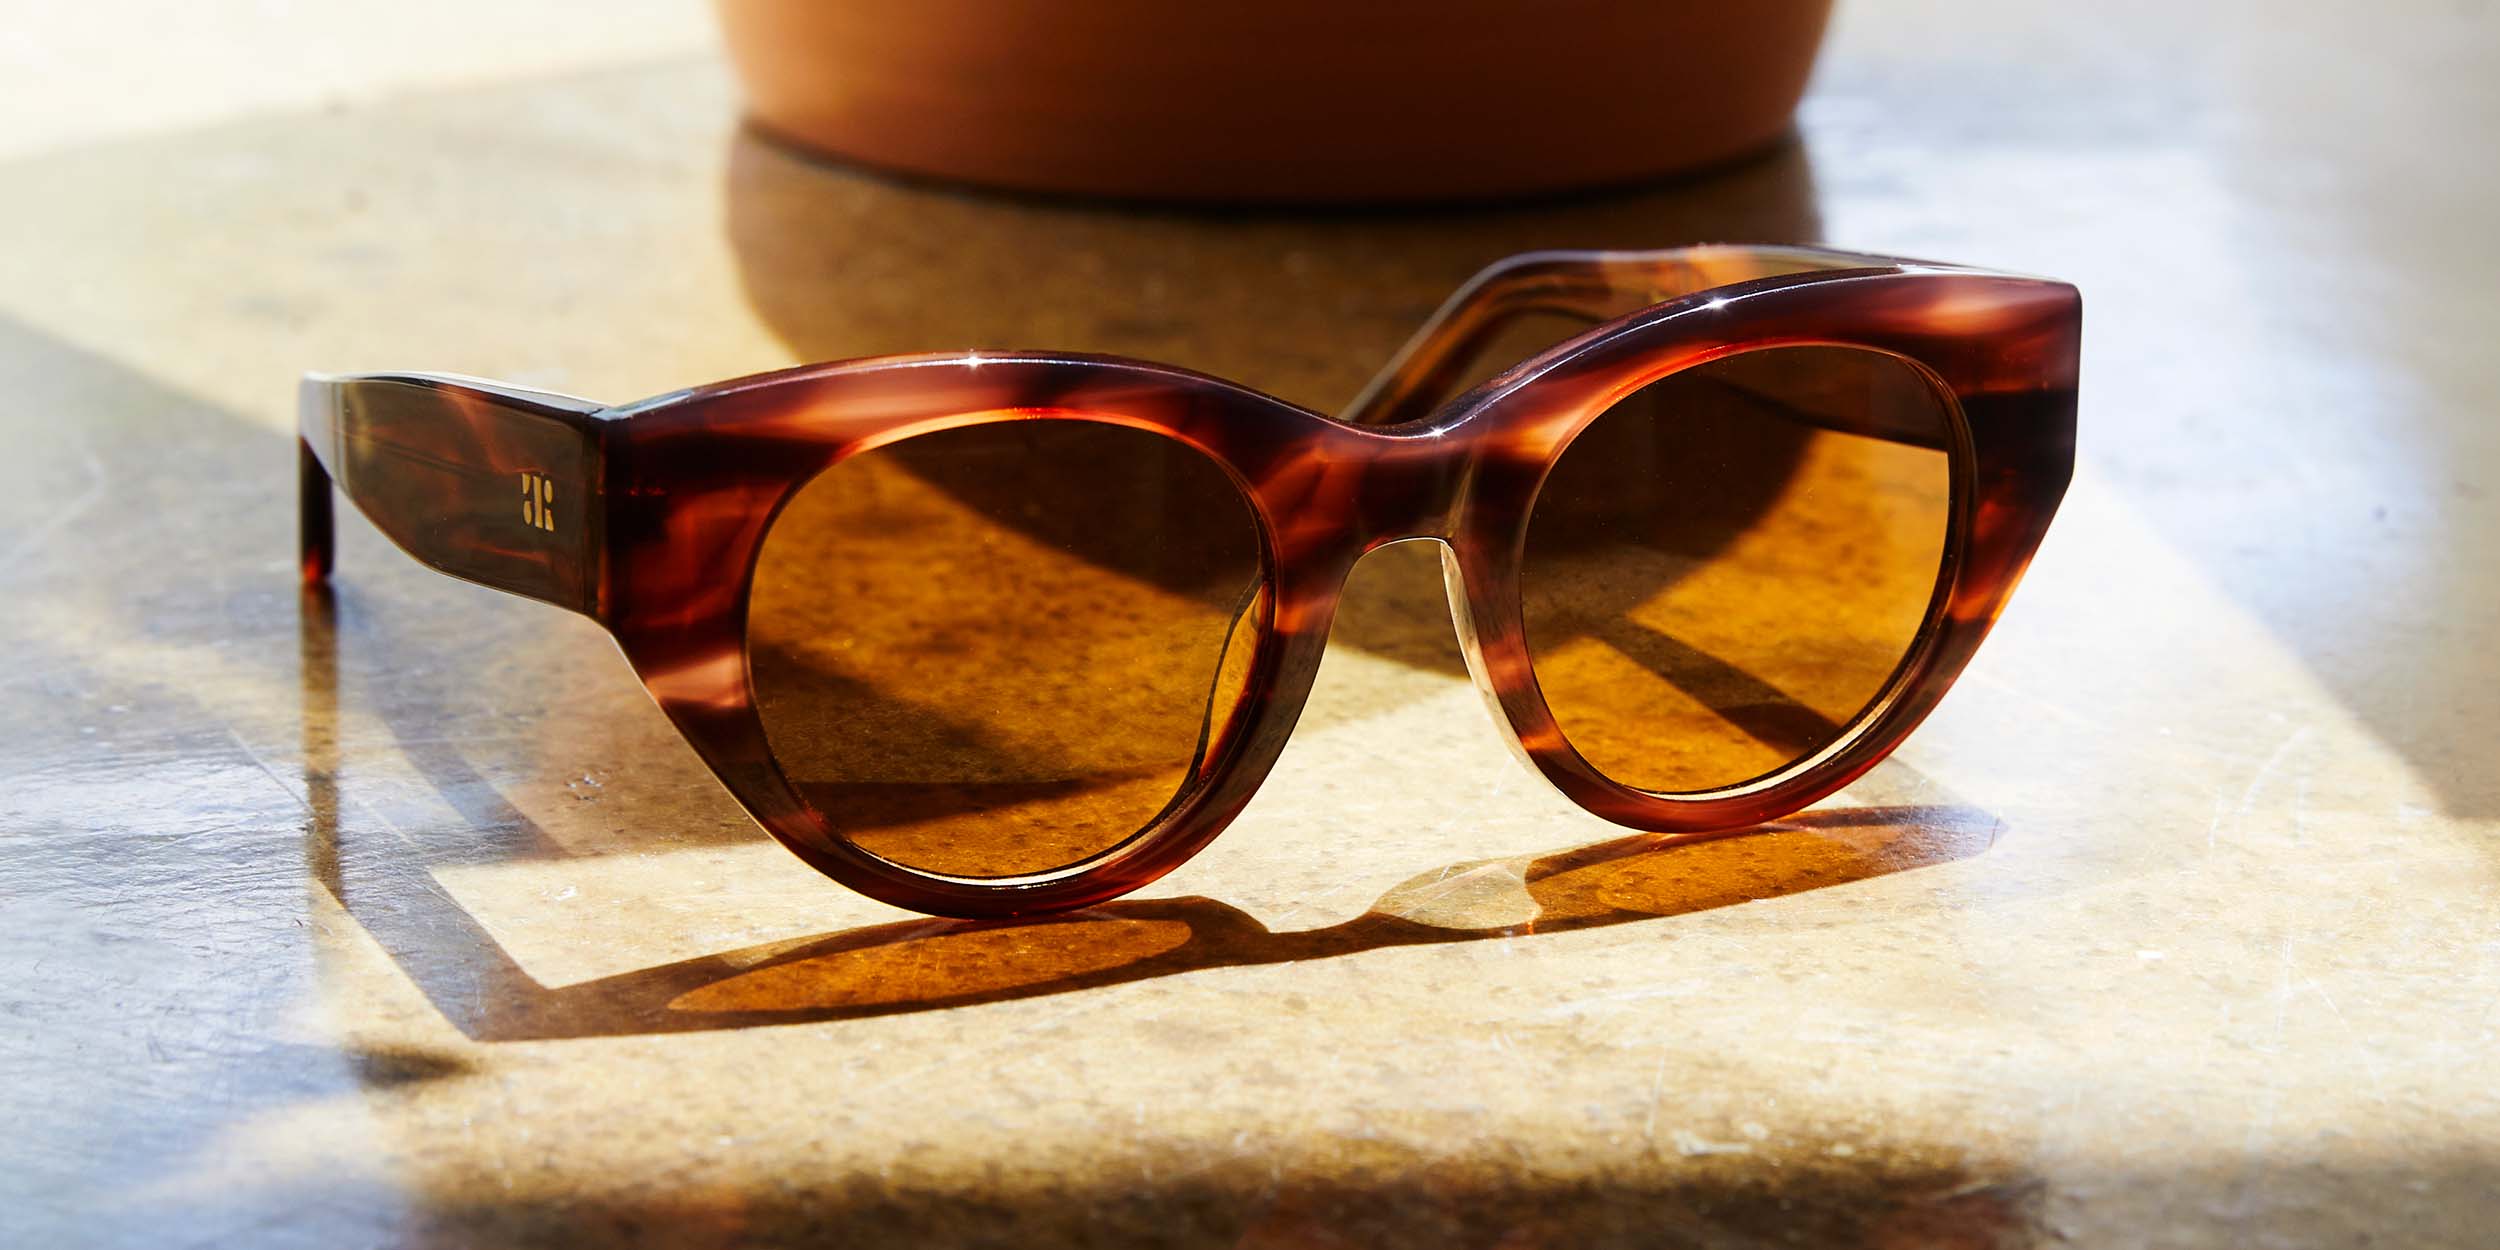 Photo Details of Jackie Brown Marble Reading Glasses in a room